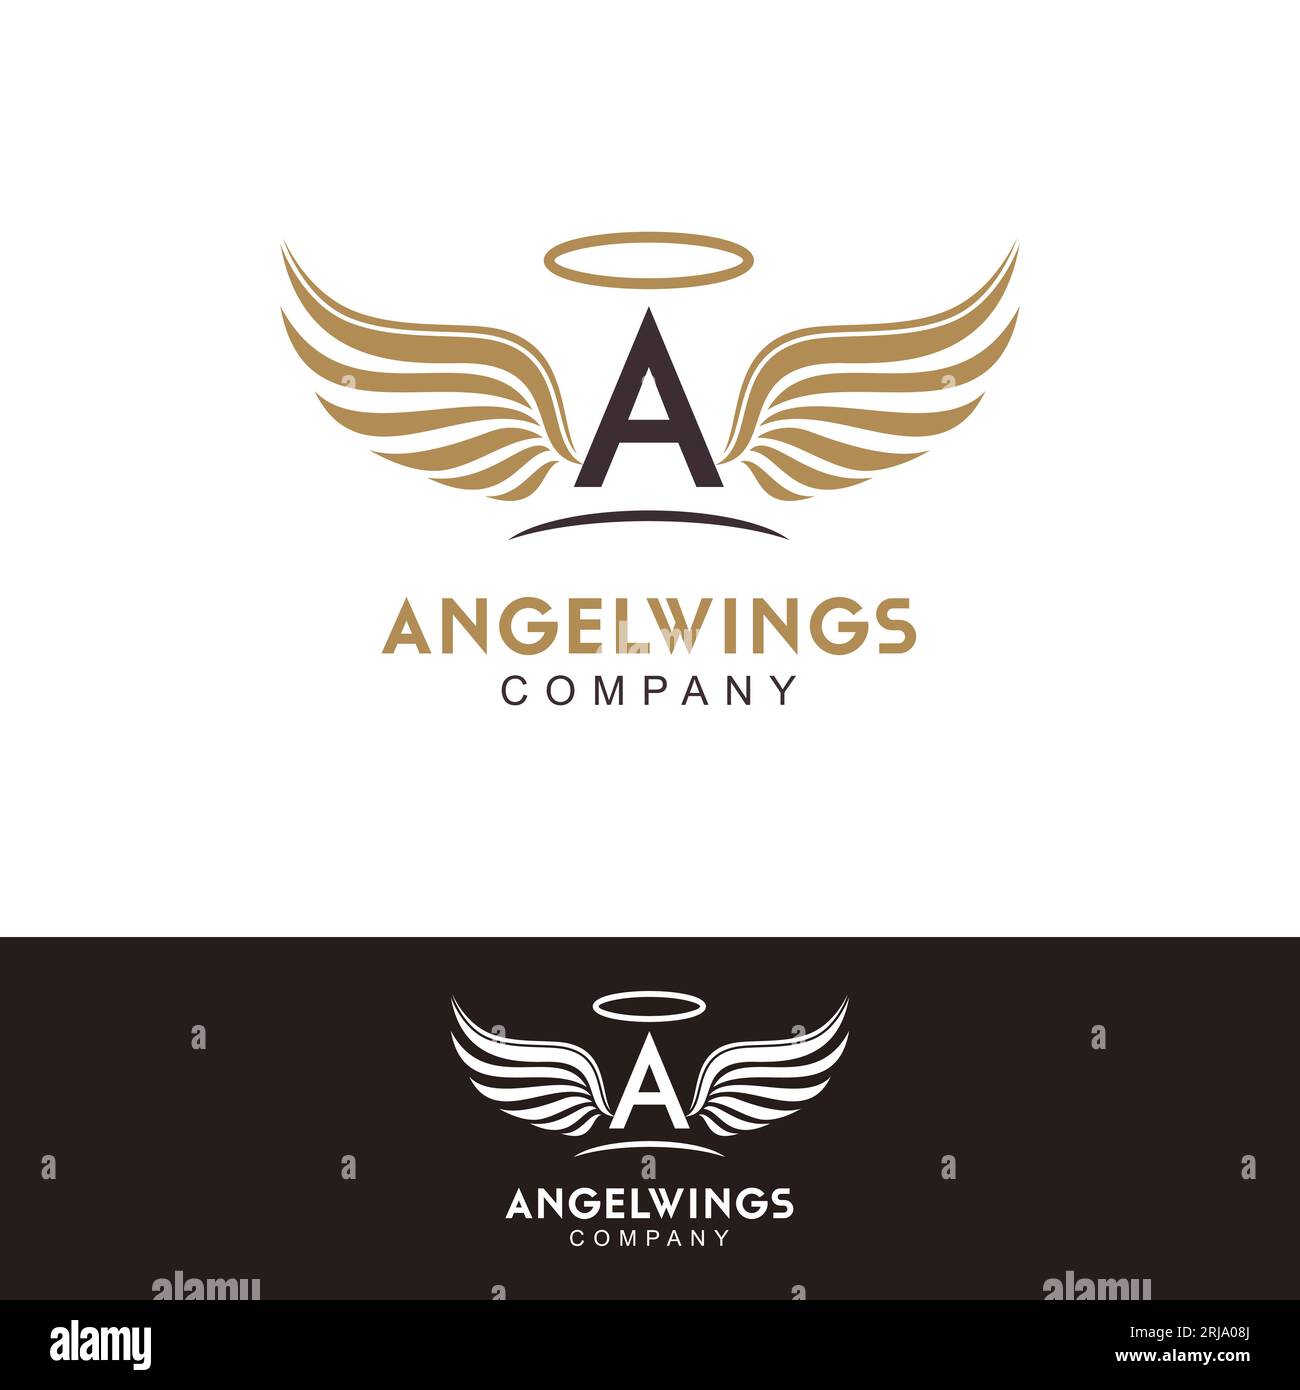 Initial Letter A and Angel Wings logo design inspiration Stock Vector